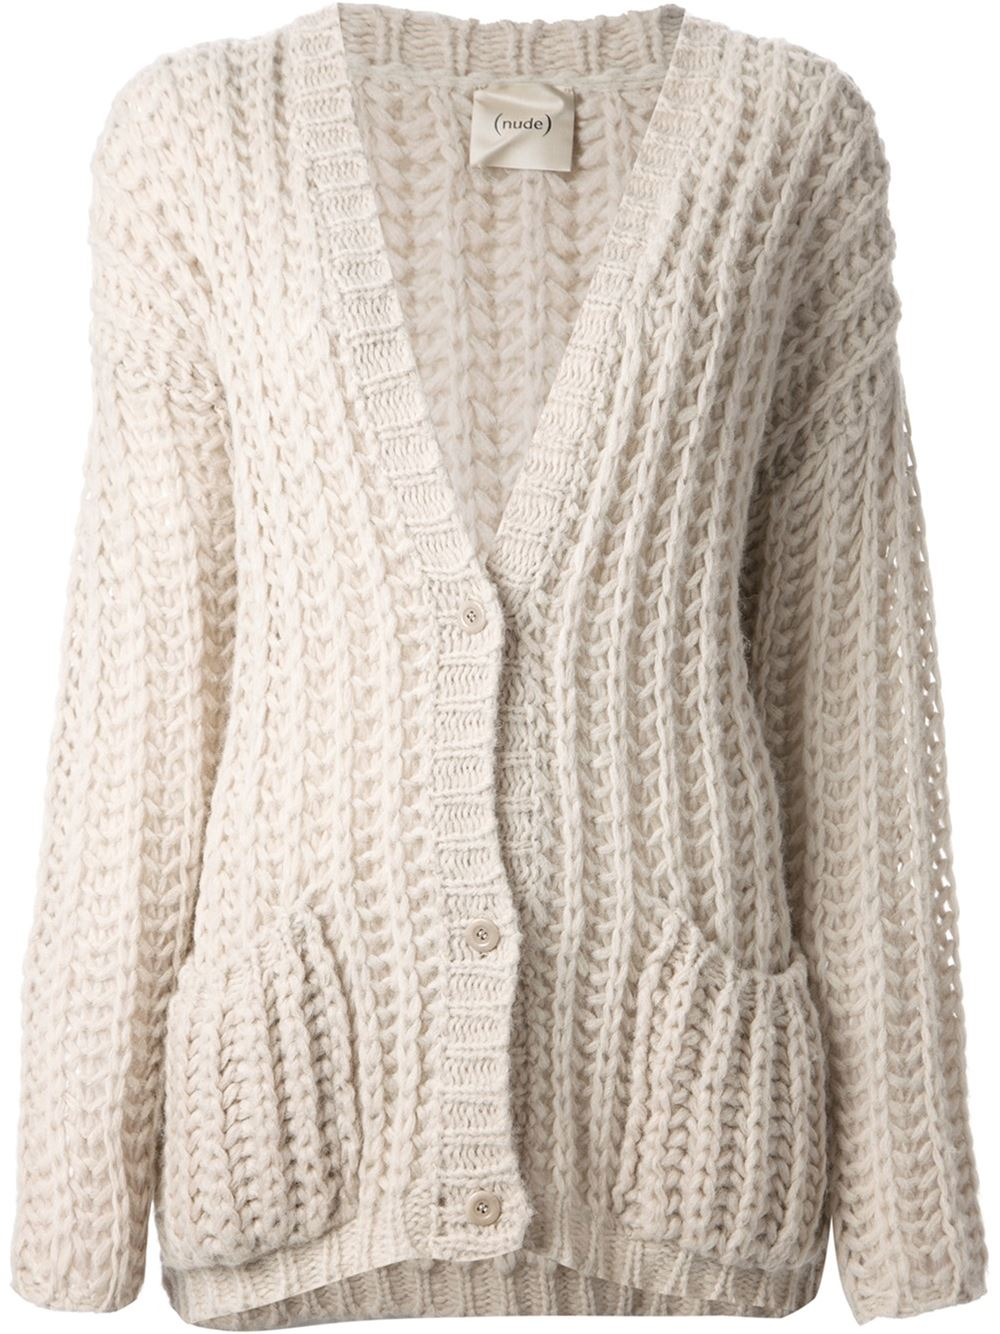 Lyst - Nude Chunky Knit Cardigan in Natural